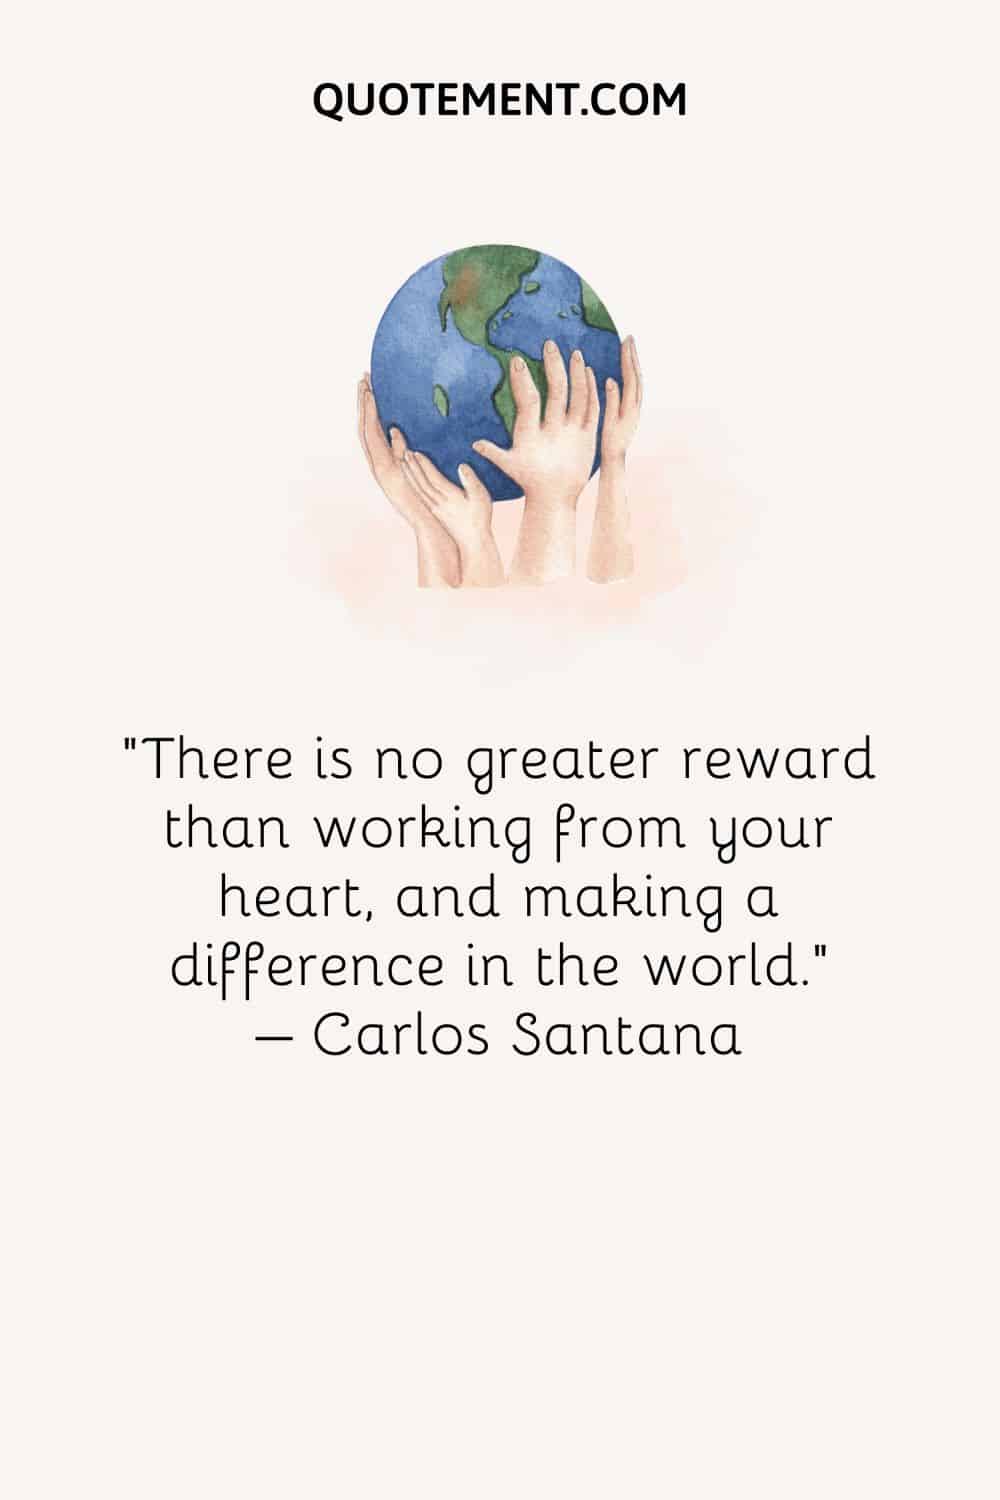 There is no greater reward than working from your heart, and making a difference in the world